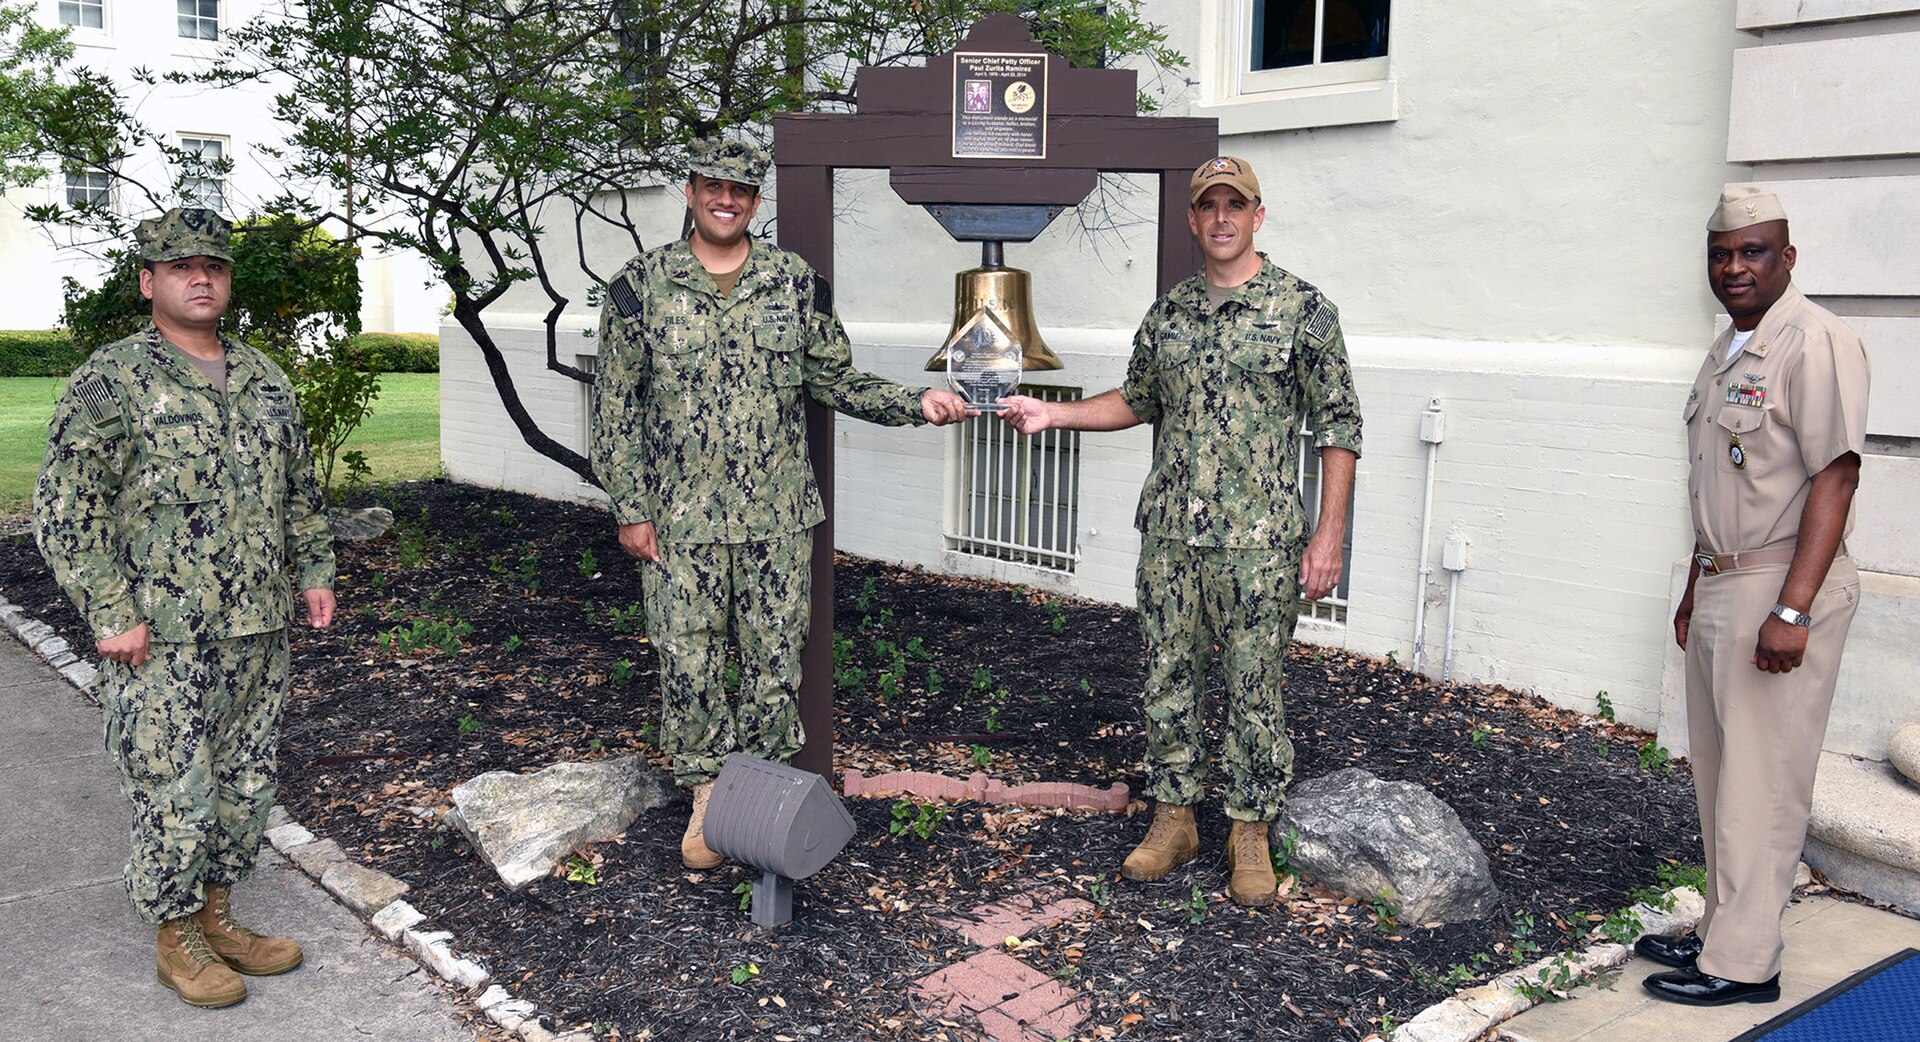 Cmdr. Nicholas Gamiz (right center), Navy Recruiting District San Antonio commanding officer, is joined by (from left) Command Master Chief Francisco Valdovinos, Cmdr. Michael Files, and Master Chief Matthew Maduemesi, along with the 2004 Navy Recruiting Command’s Bronze “R” Award at NRD-SA headquarters at Joint Base San Antonio-Fort Sam Houston.  The NRD was awarded the Bronze “R” by the Navy Recruiting Command for its performance during the first half of fiscal year 2020.